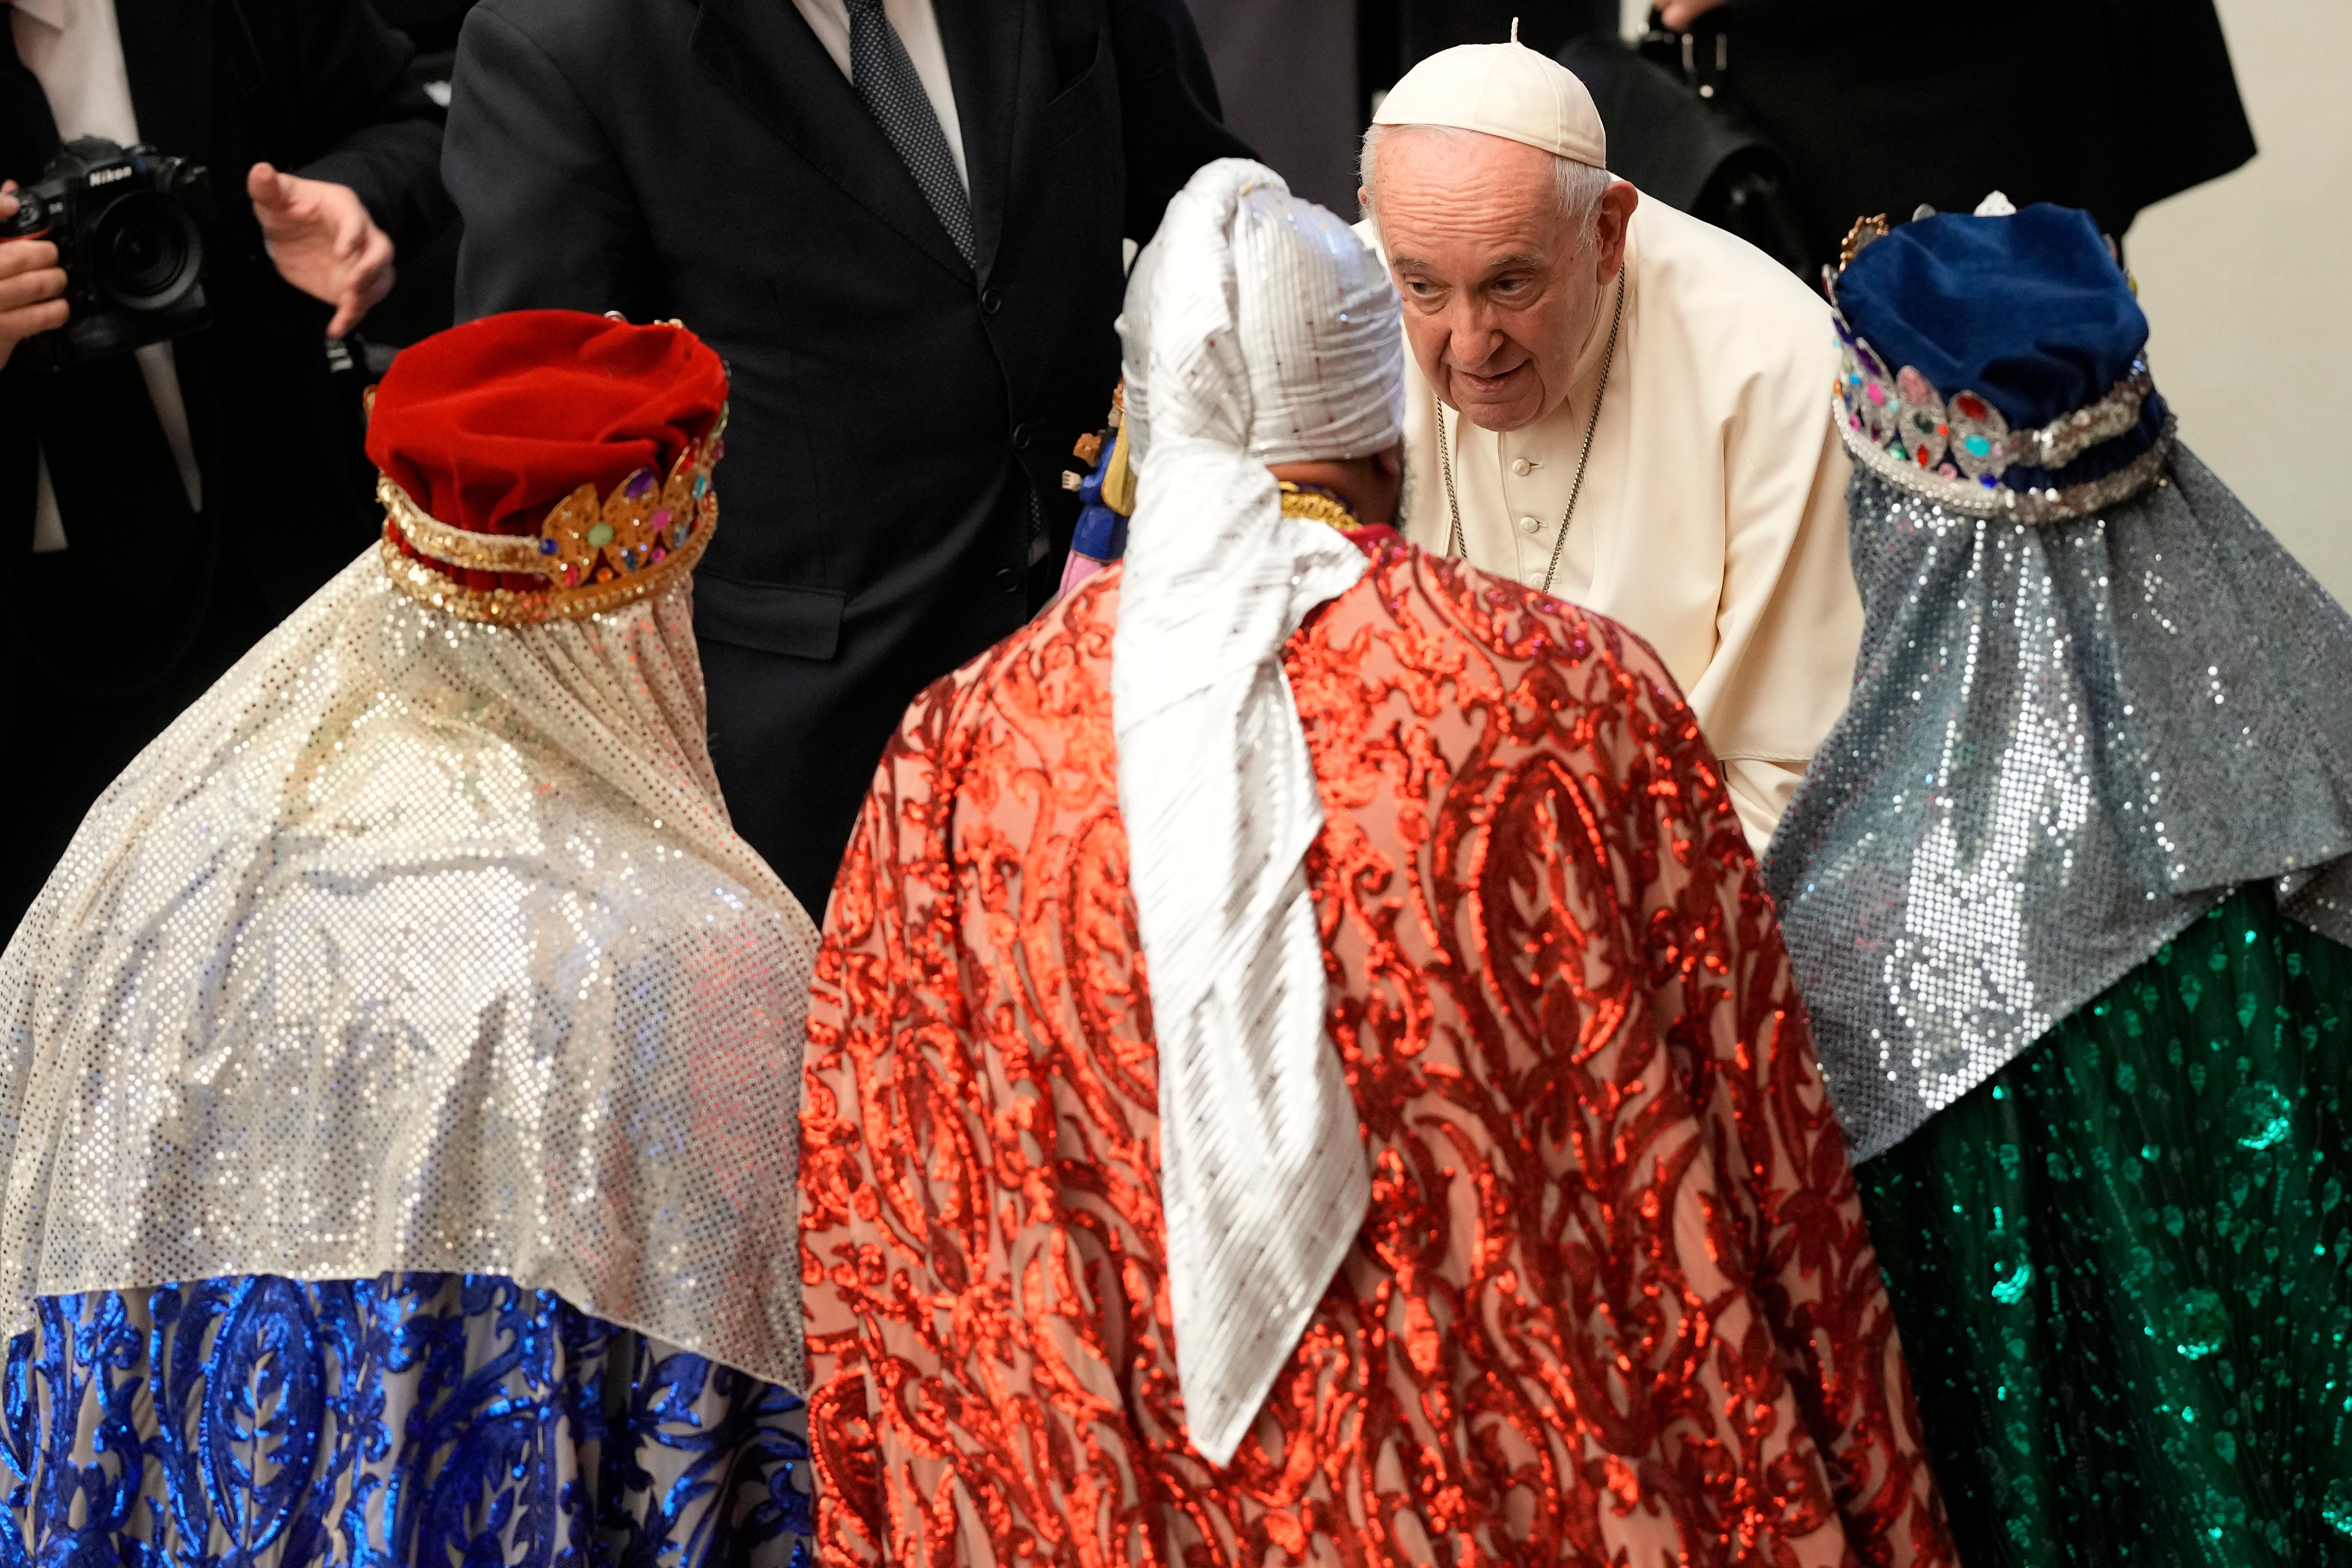 Pope Francis talks with faithful dressed as the Three Wise Men at the end of his weekly general audience